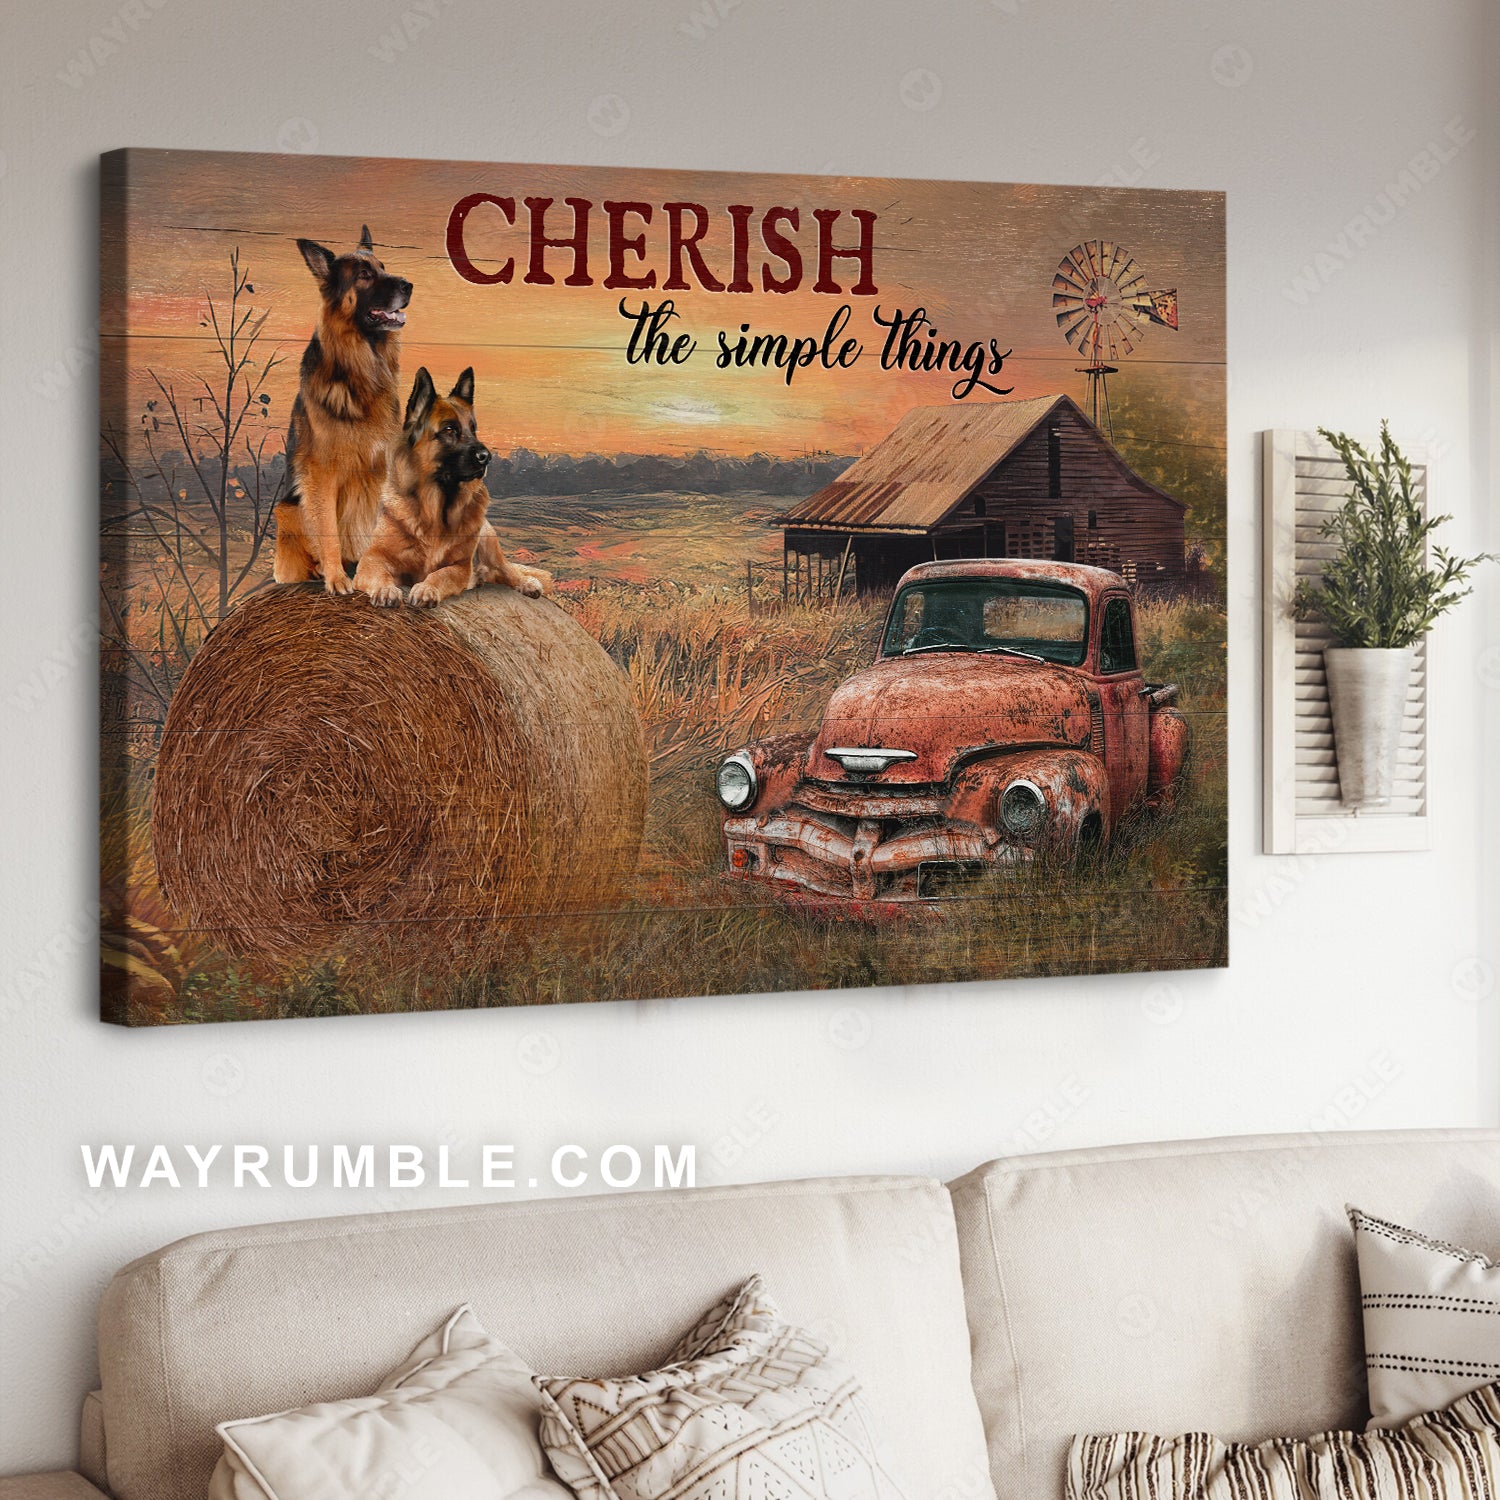 German Shepherd, Red old car, Farm painting, Cherish the simple thing - Dog Landscape Canvas Prints, Wall Art